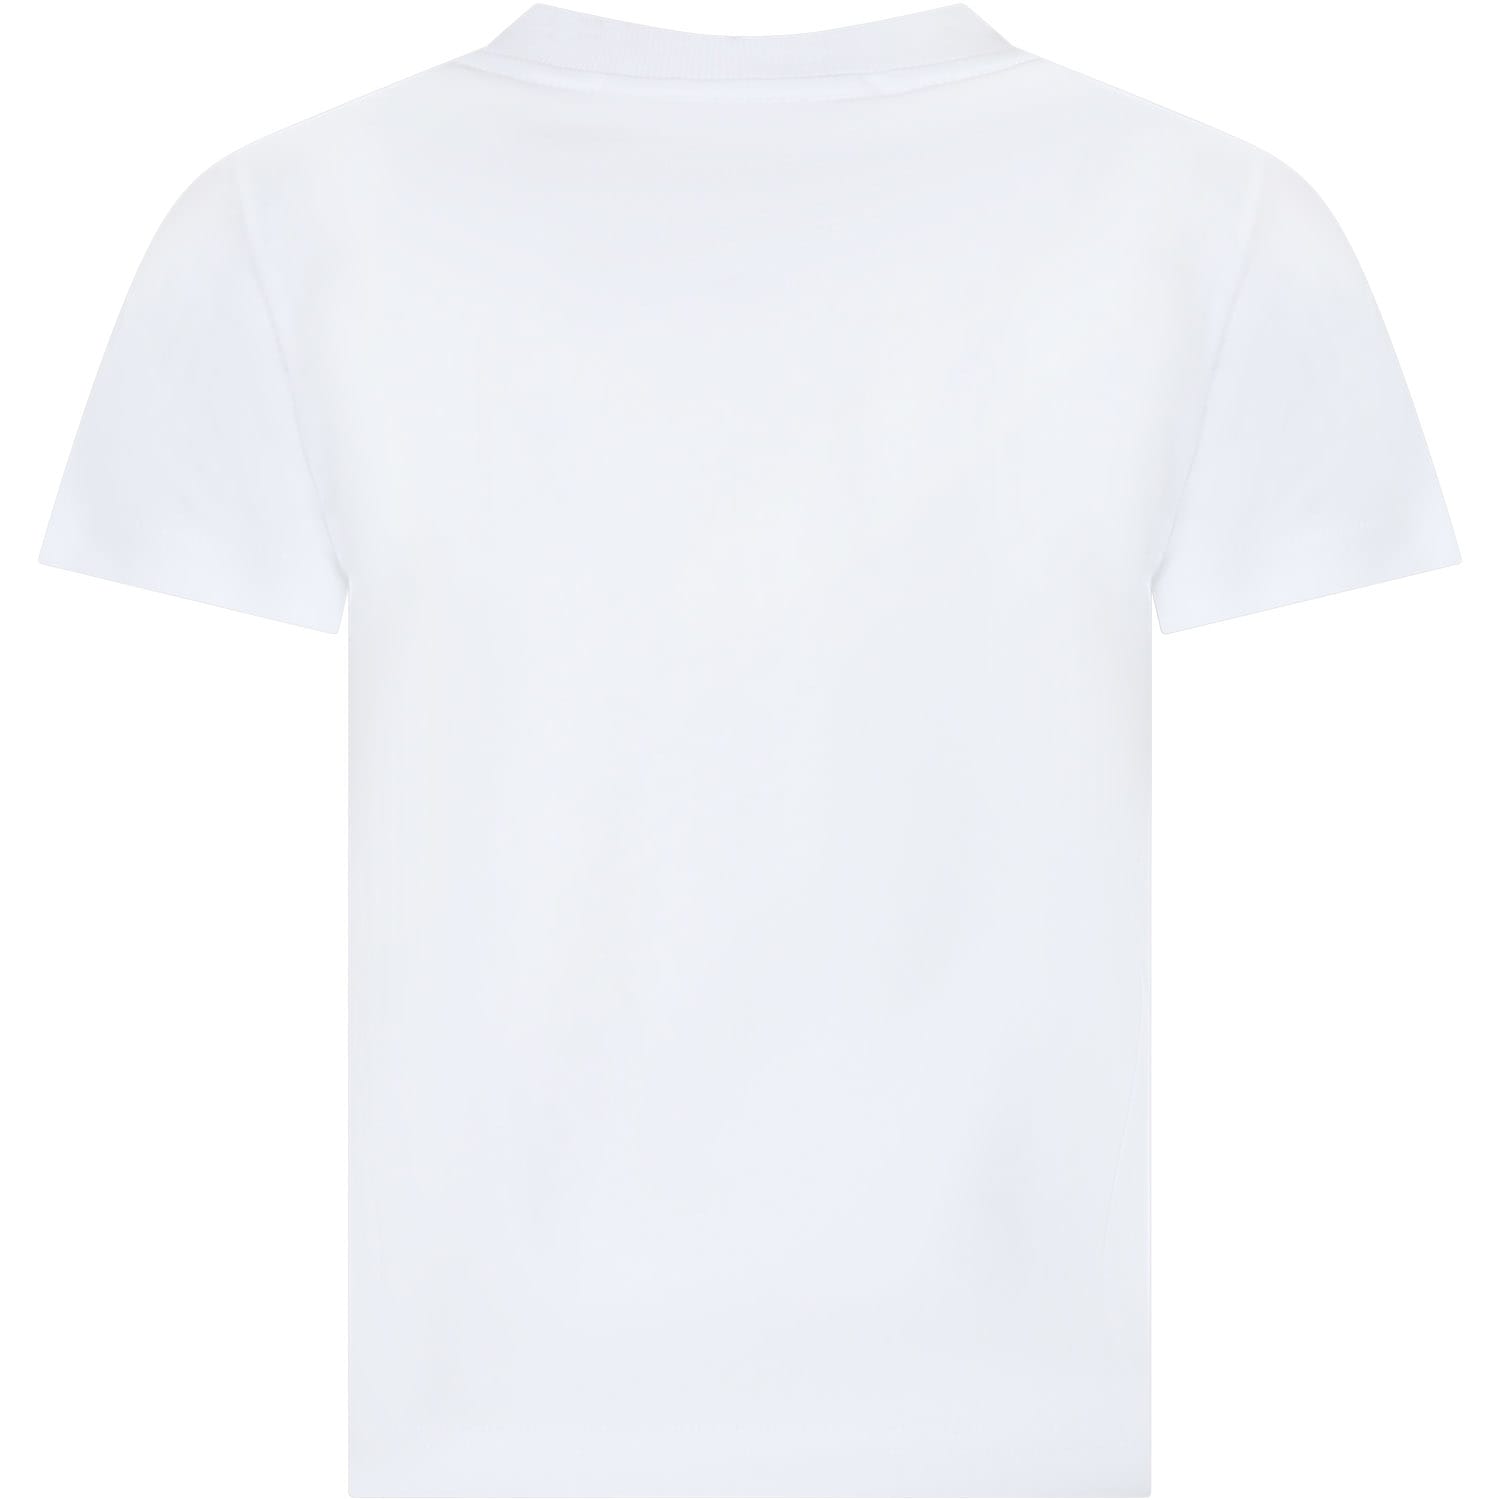 Shop Alessandro Enriquez White T-shirt For Girl With Mermaid Print And Writing